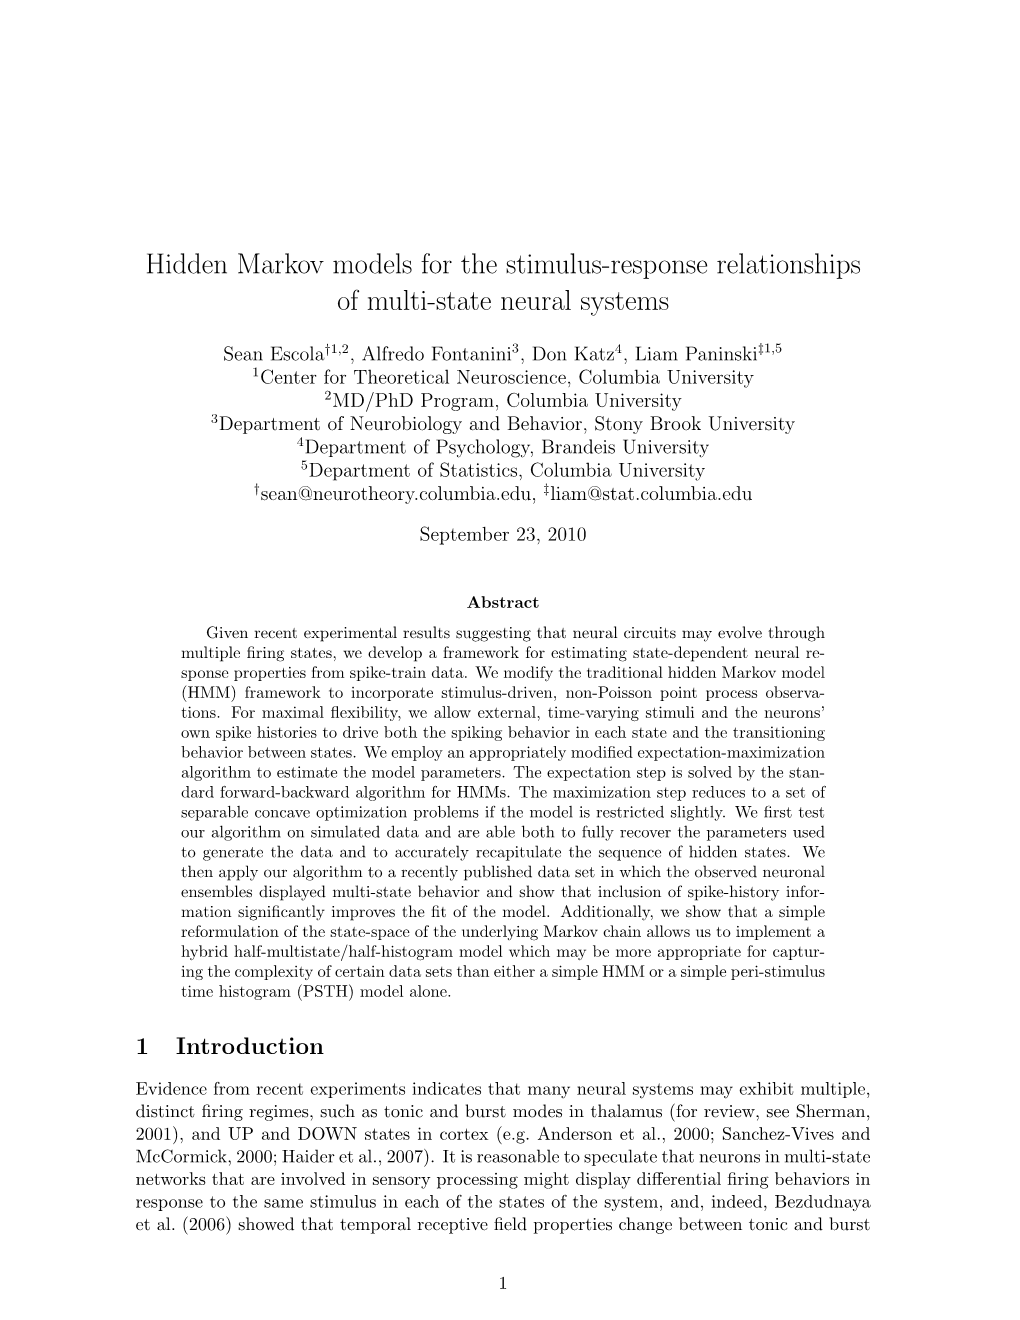 Hidden Markov Models for the Inference of Neural States And